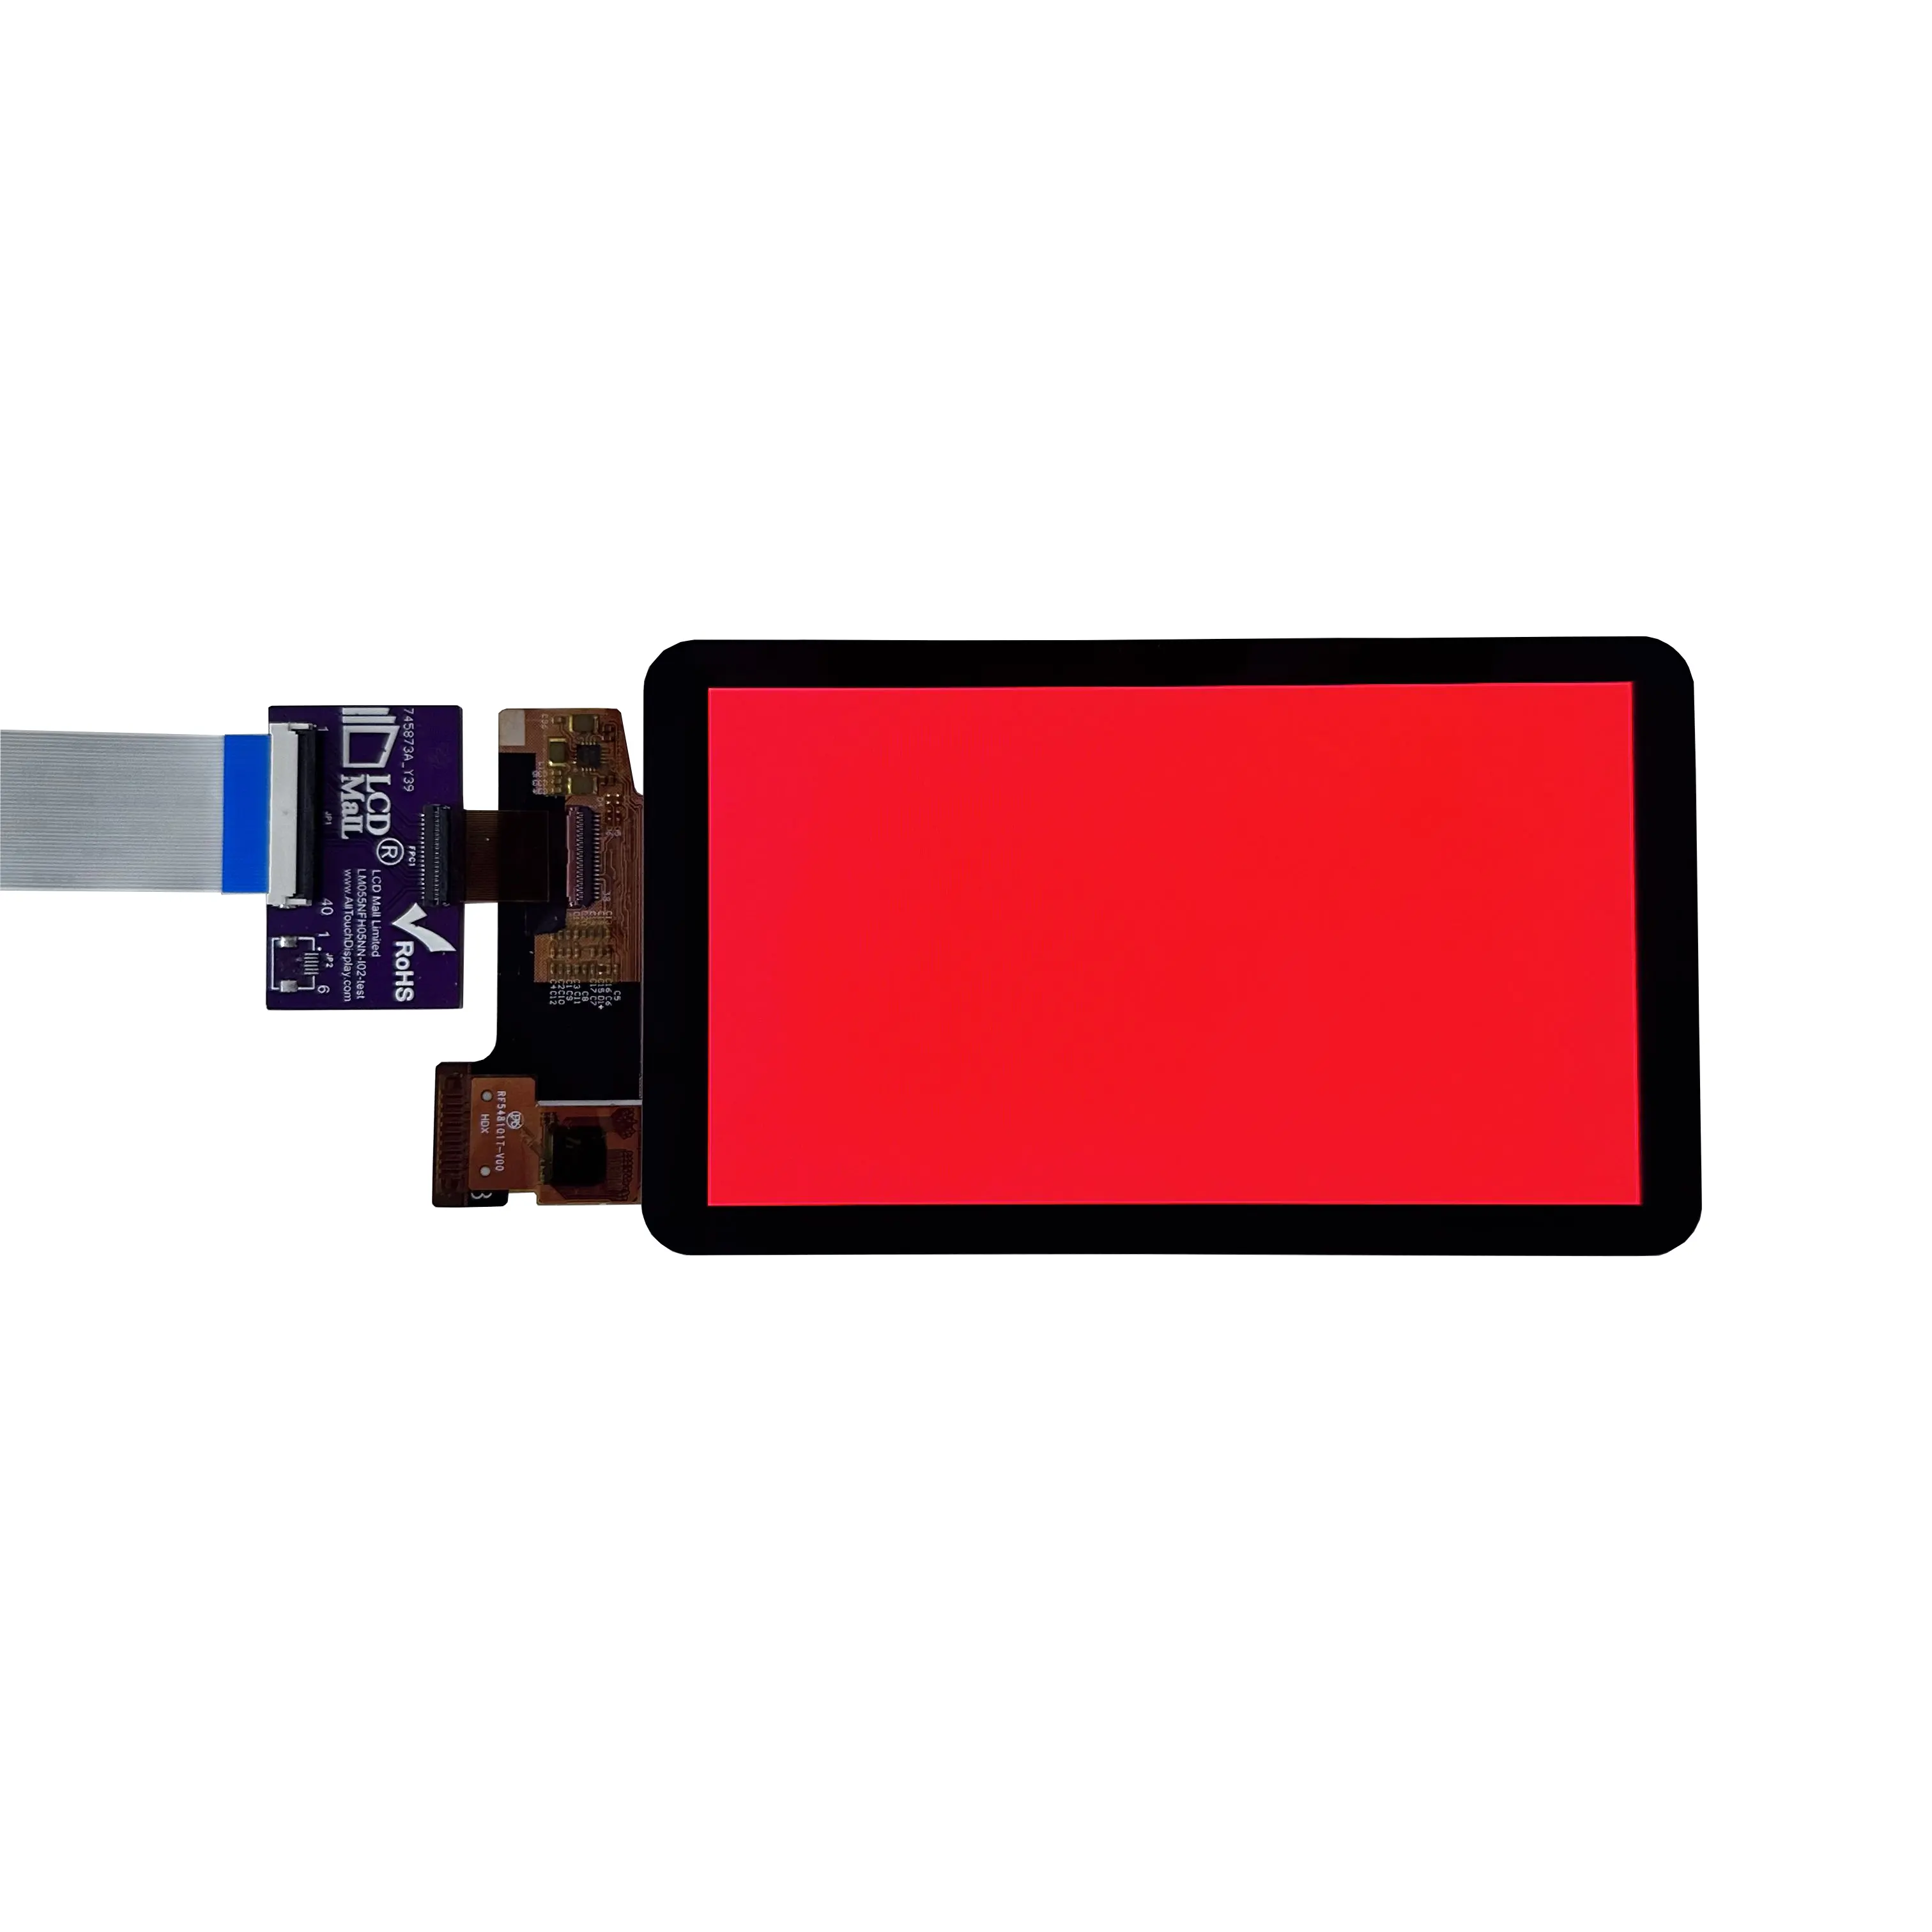 5.5" AMOLED LCD display 1080*1920 IPS OLED Screen MIPI interface AMOLED Display LCD Module with Oncell Capacitive Touch Panel